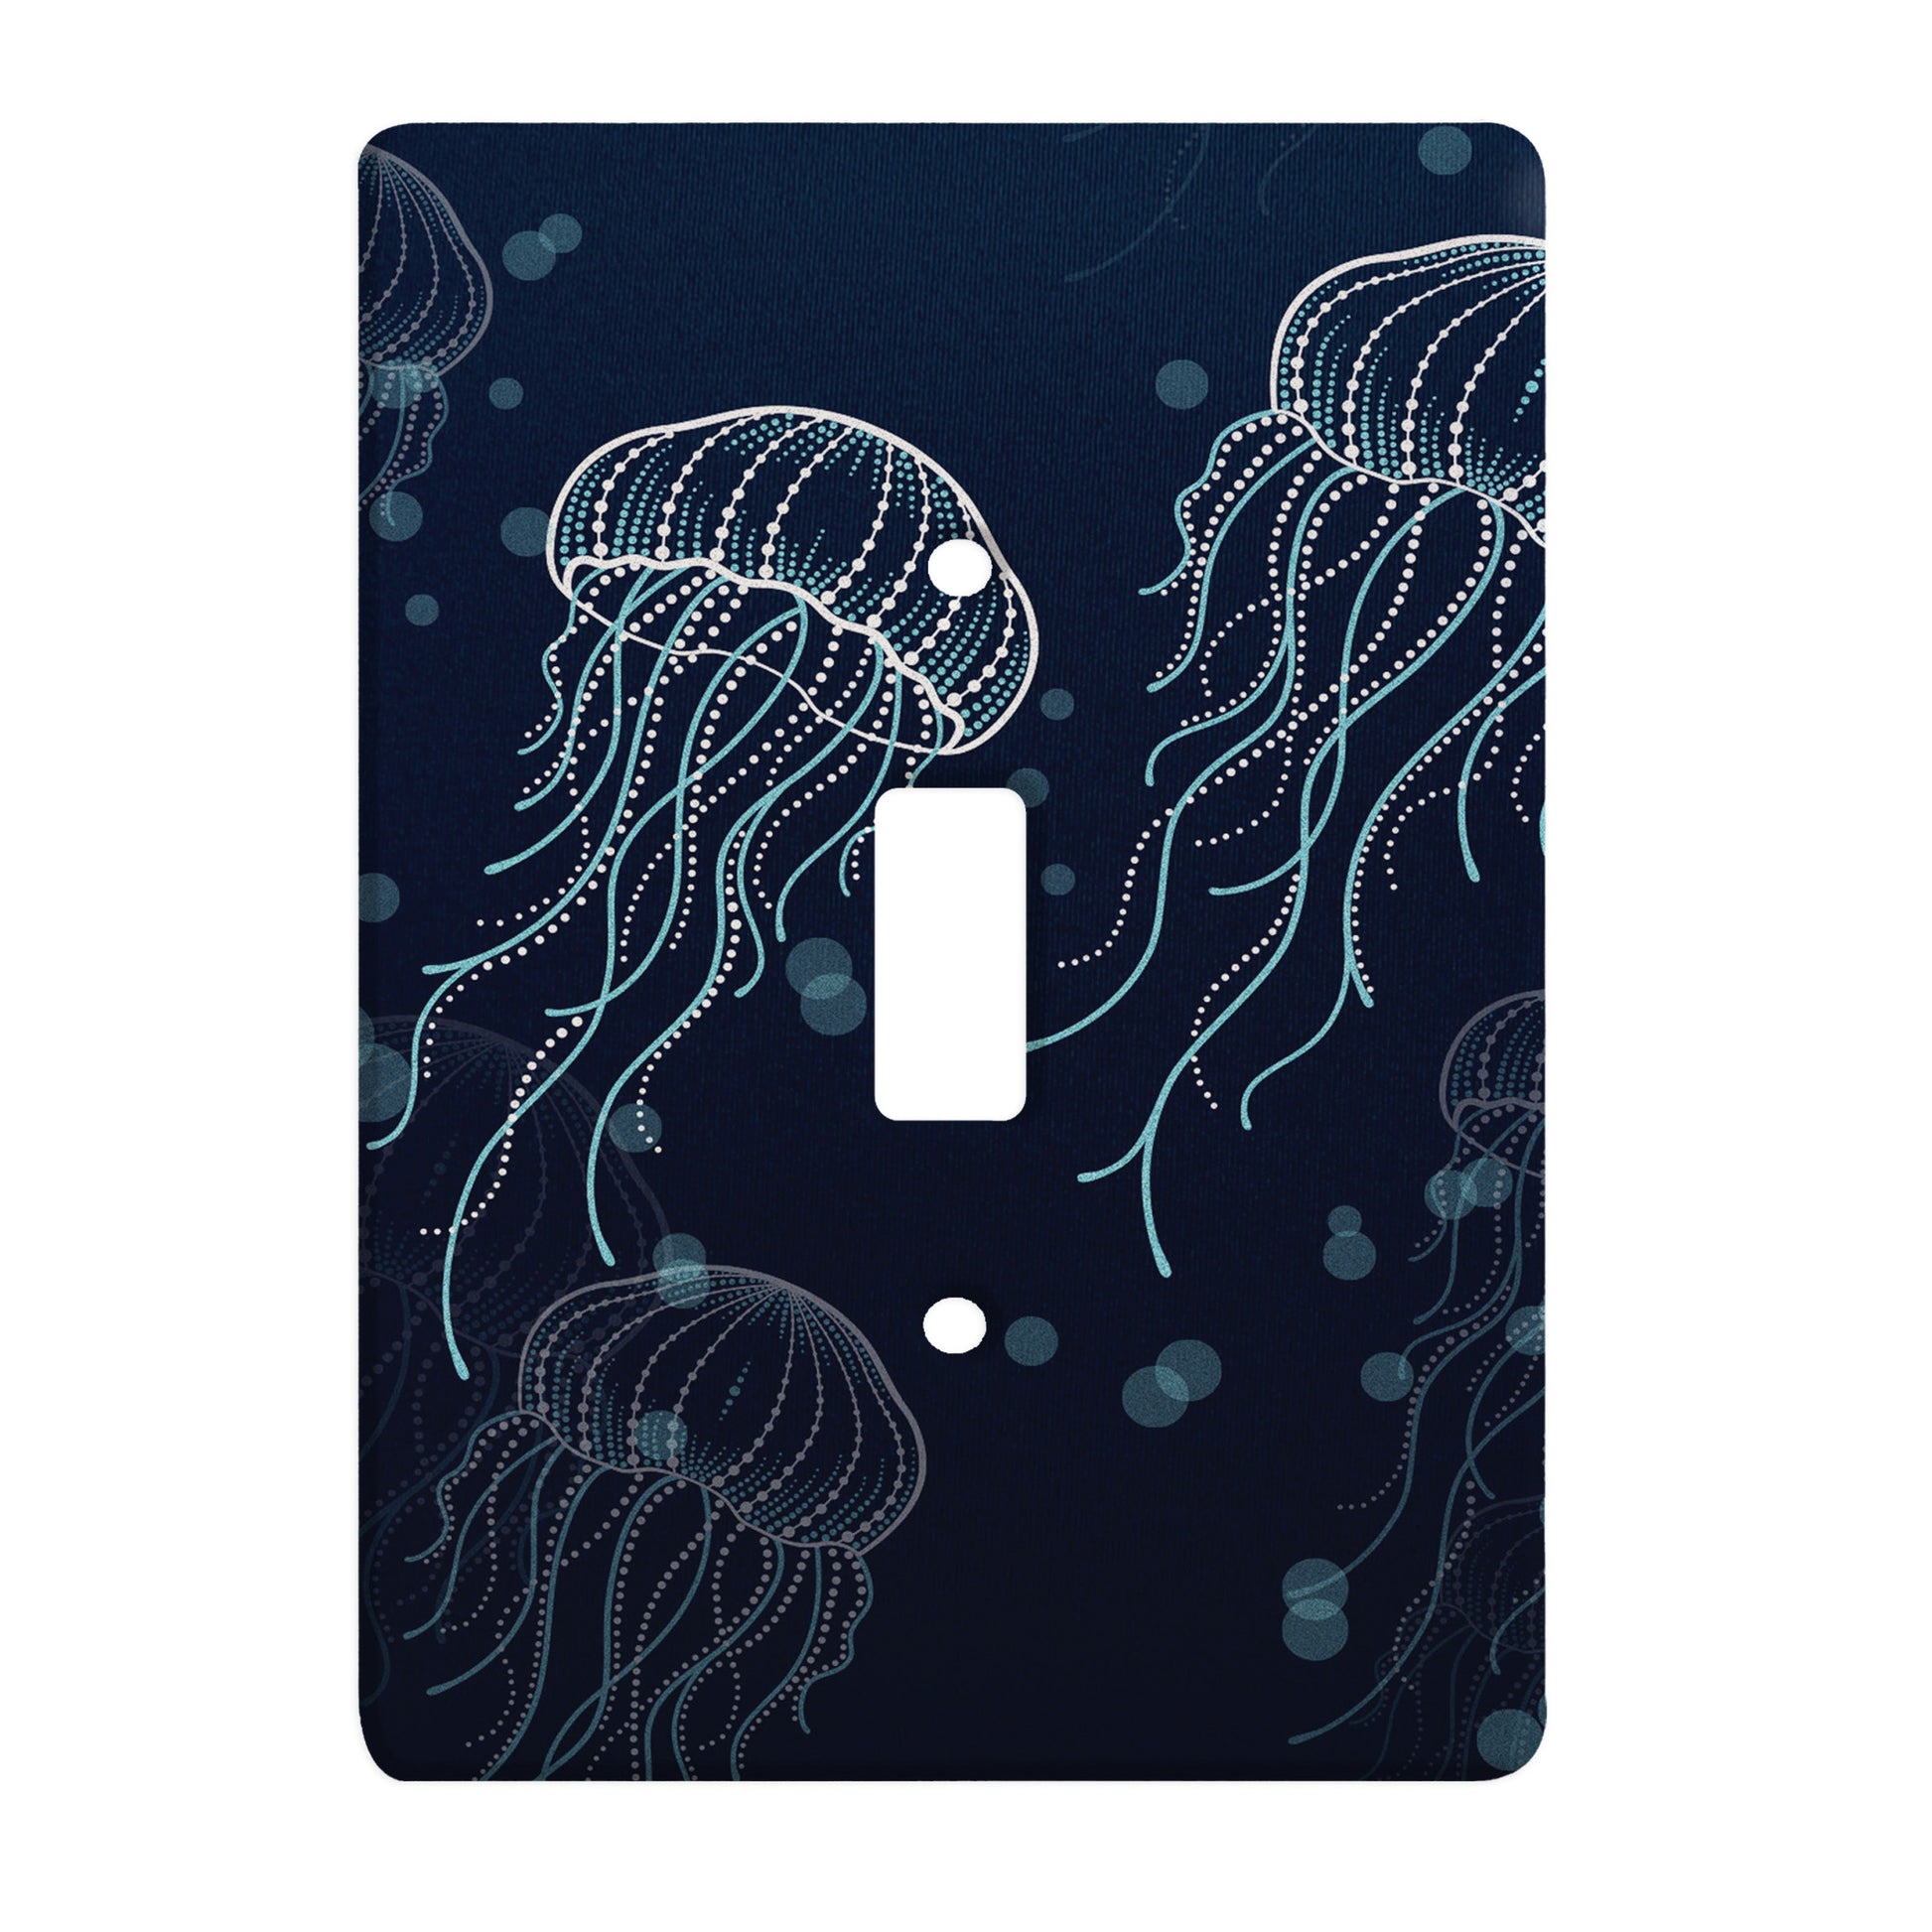 navy ceramic single toggle switch plate featuring blue jellyfish patterns.